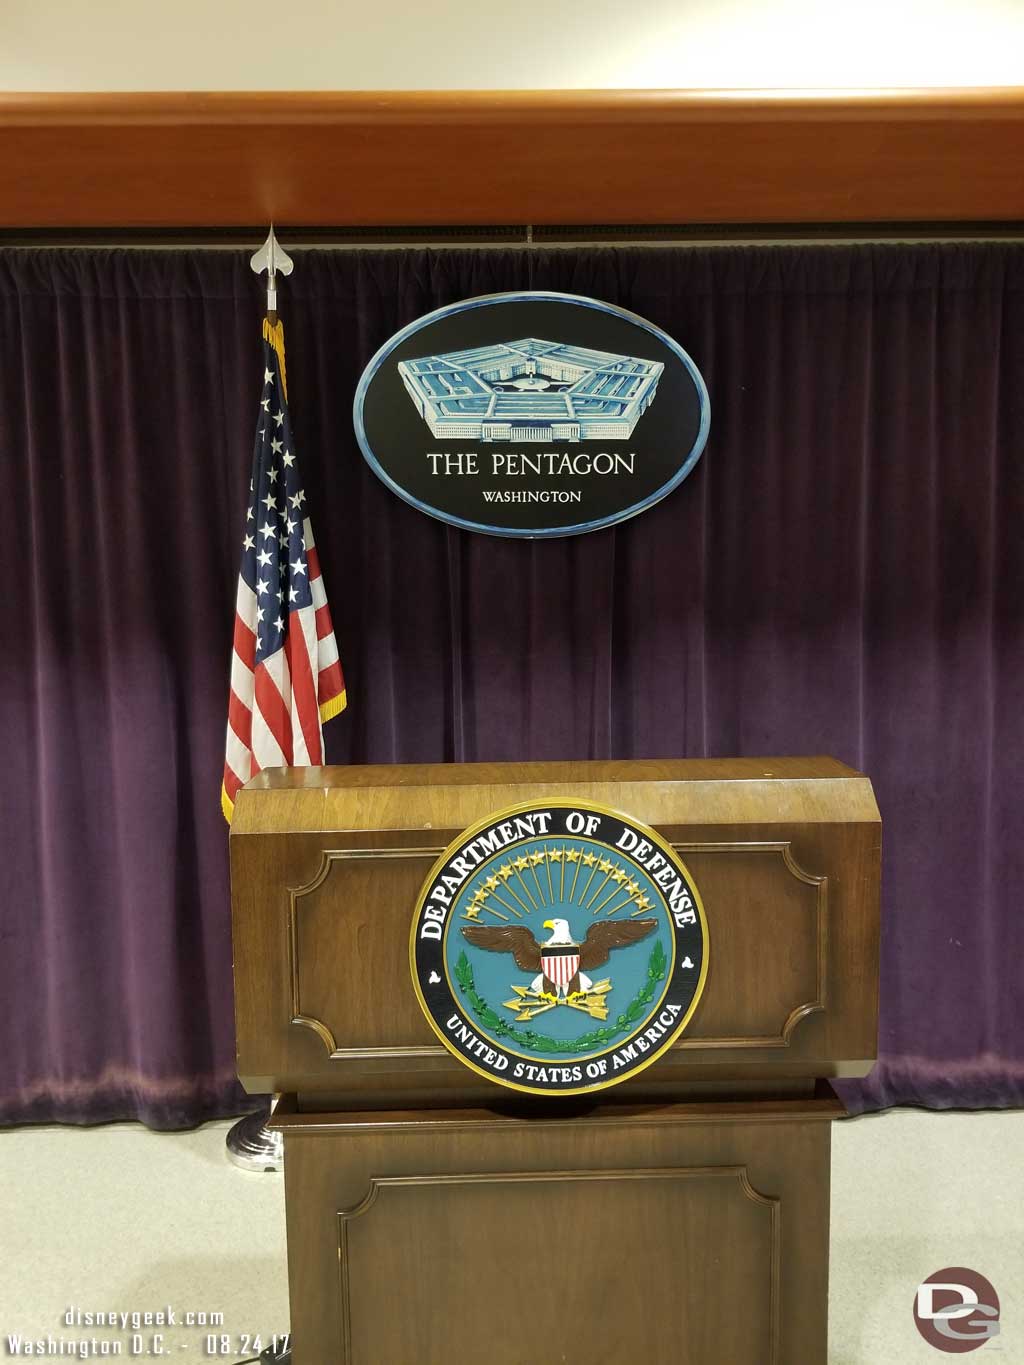 Inside the visitor waiting area is a replica of the press briefing podium that you can pose at for a picture.